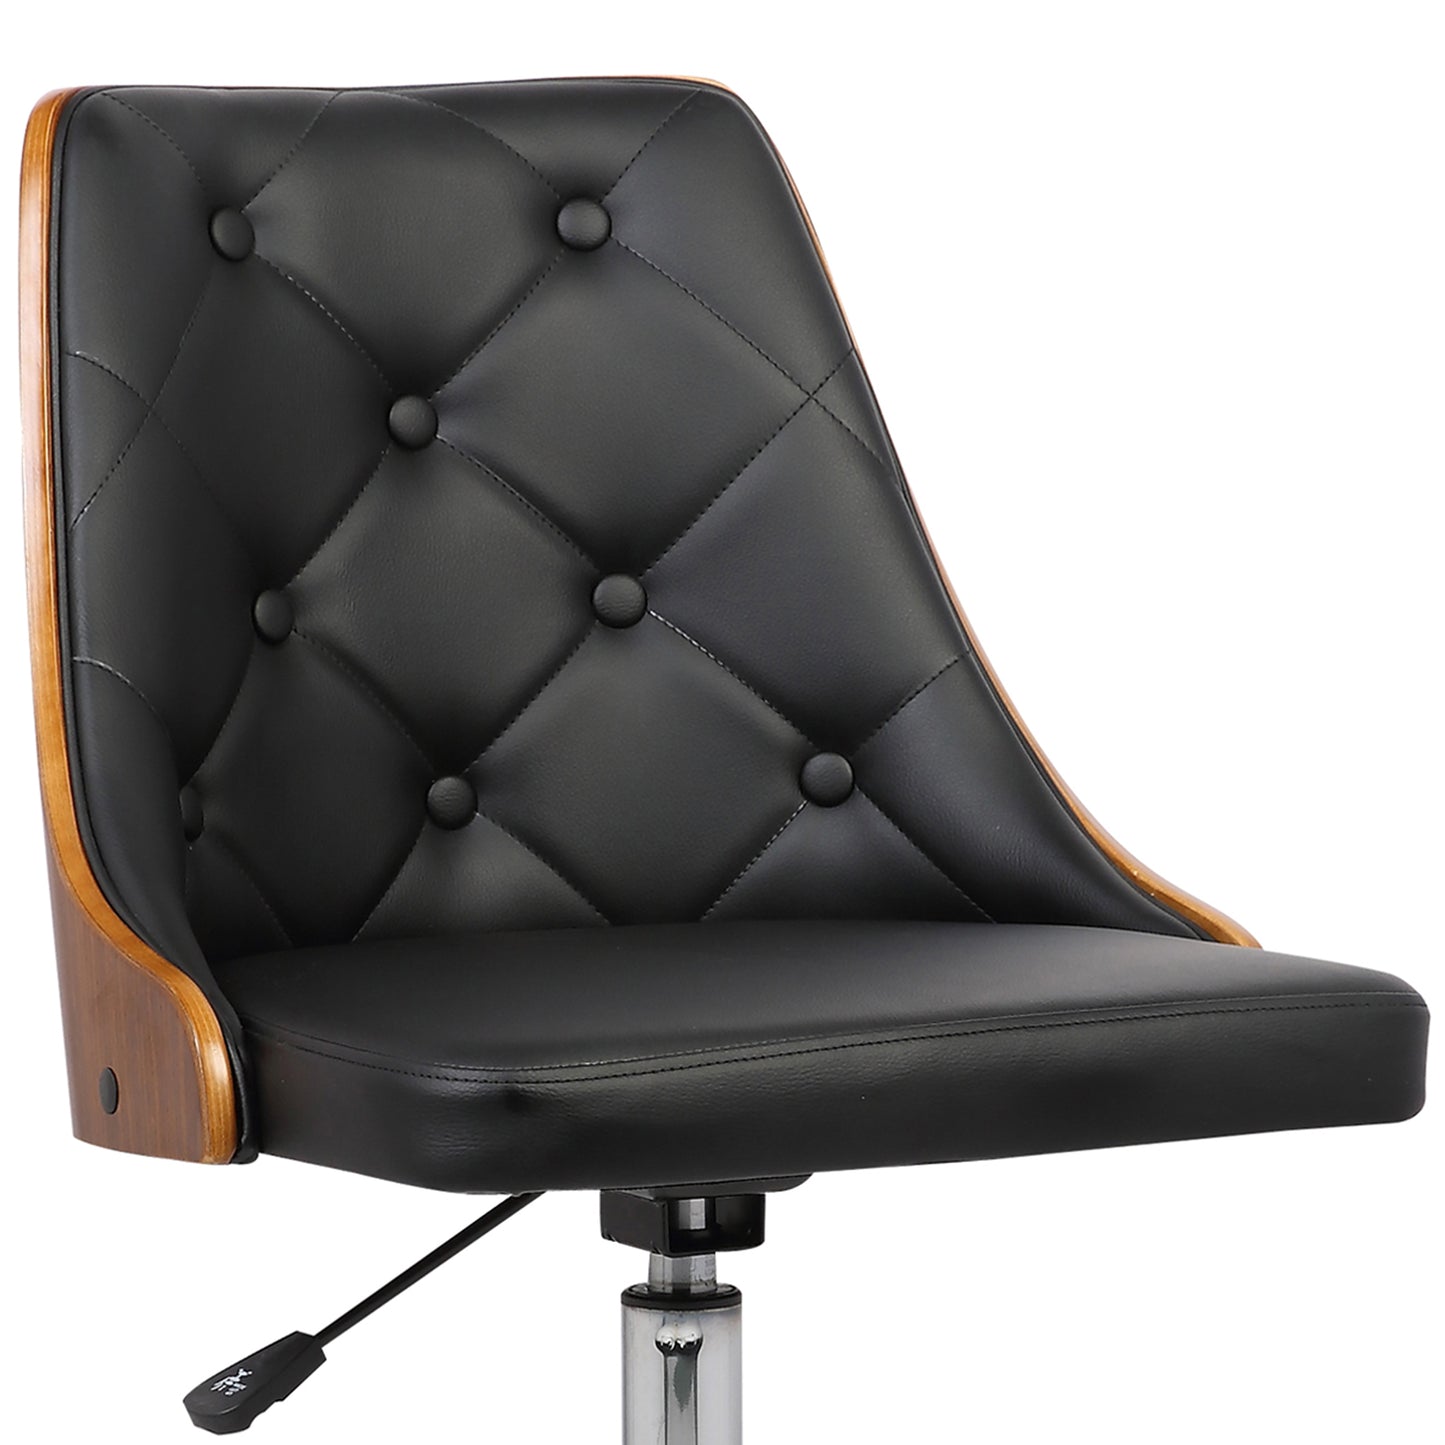 Diamond Mid-Century Office Chair in Chrome finish with Tufted Black Faux Leather and Walnut Veneer Back